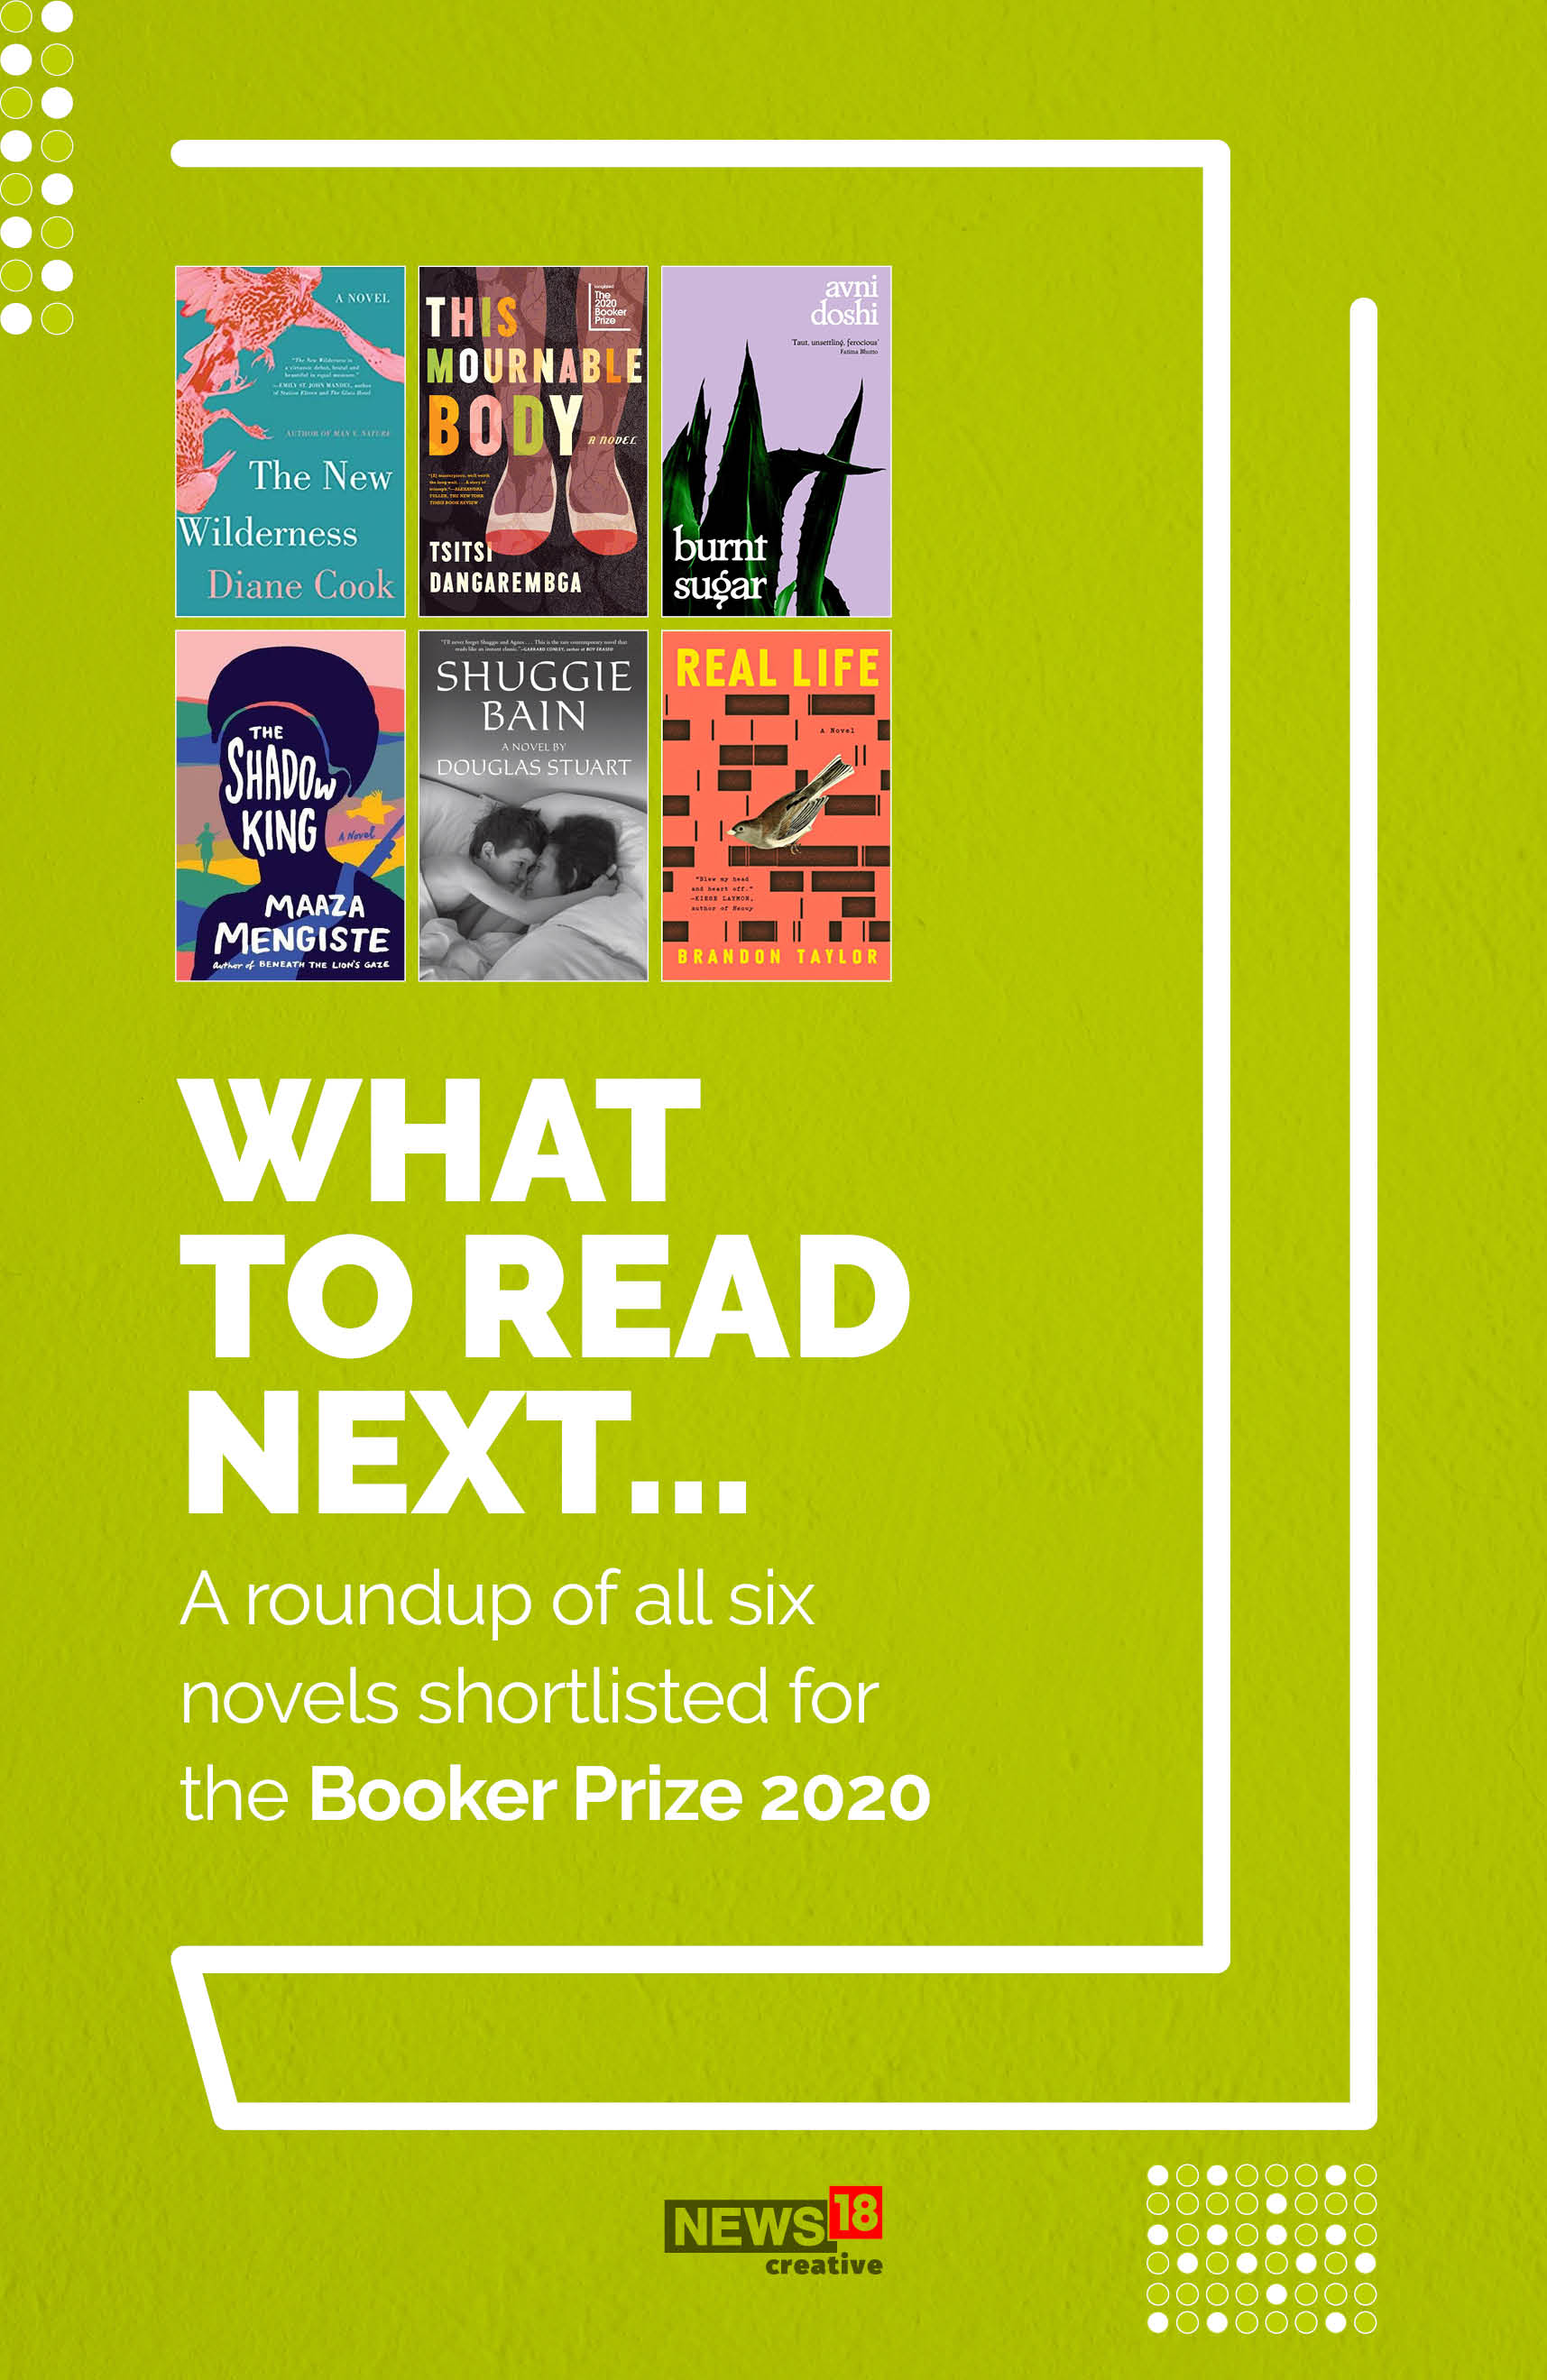 What to read next: Roundup of the Booker Prize shortlist